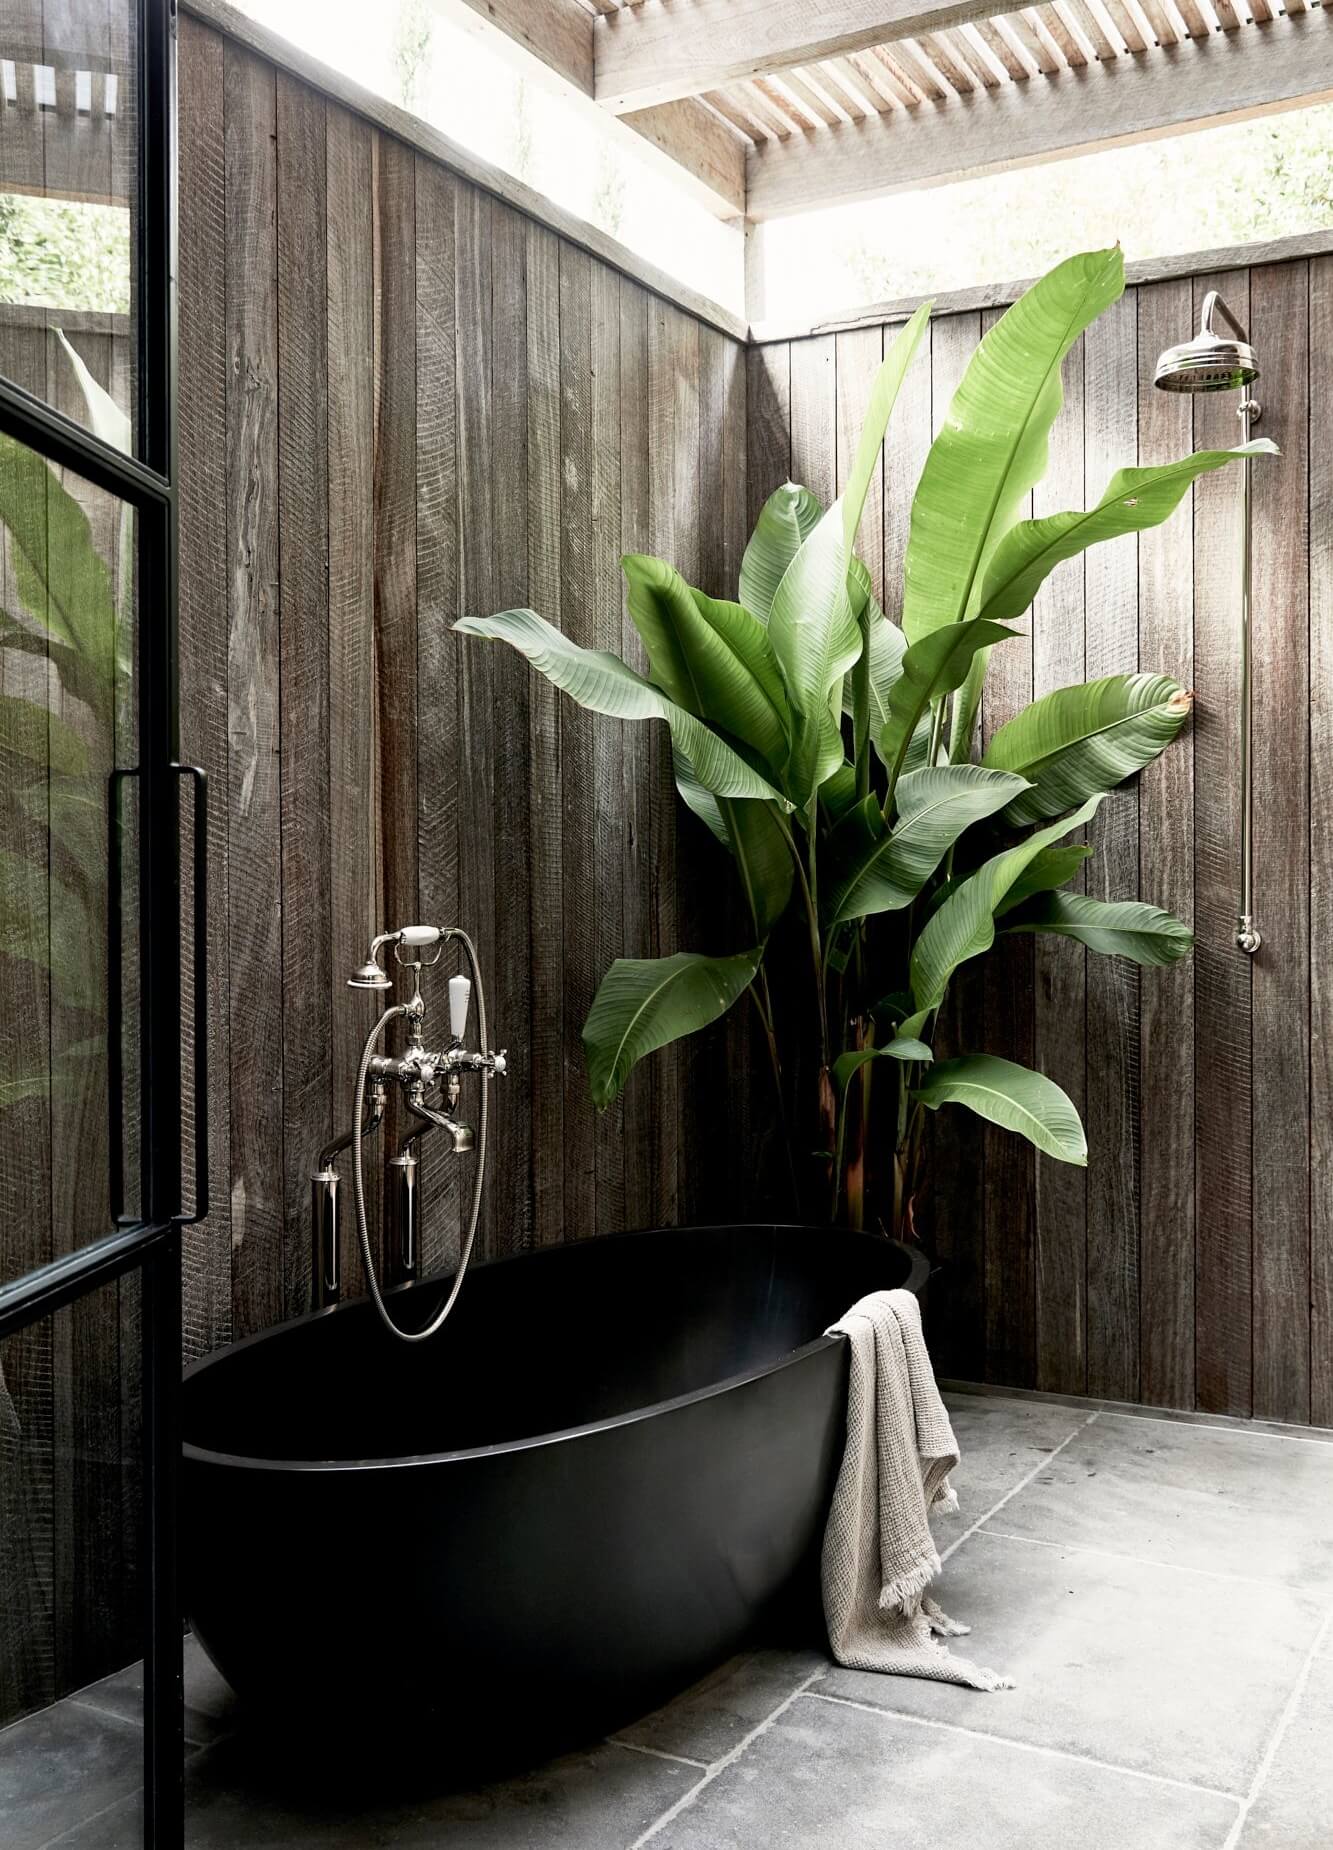 Ensuite at The Cabin, Byron Beach Abodes with black stone bathtub, tapware from English Tapware Company and huge indoor feature plant